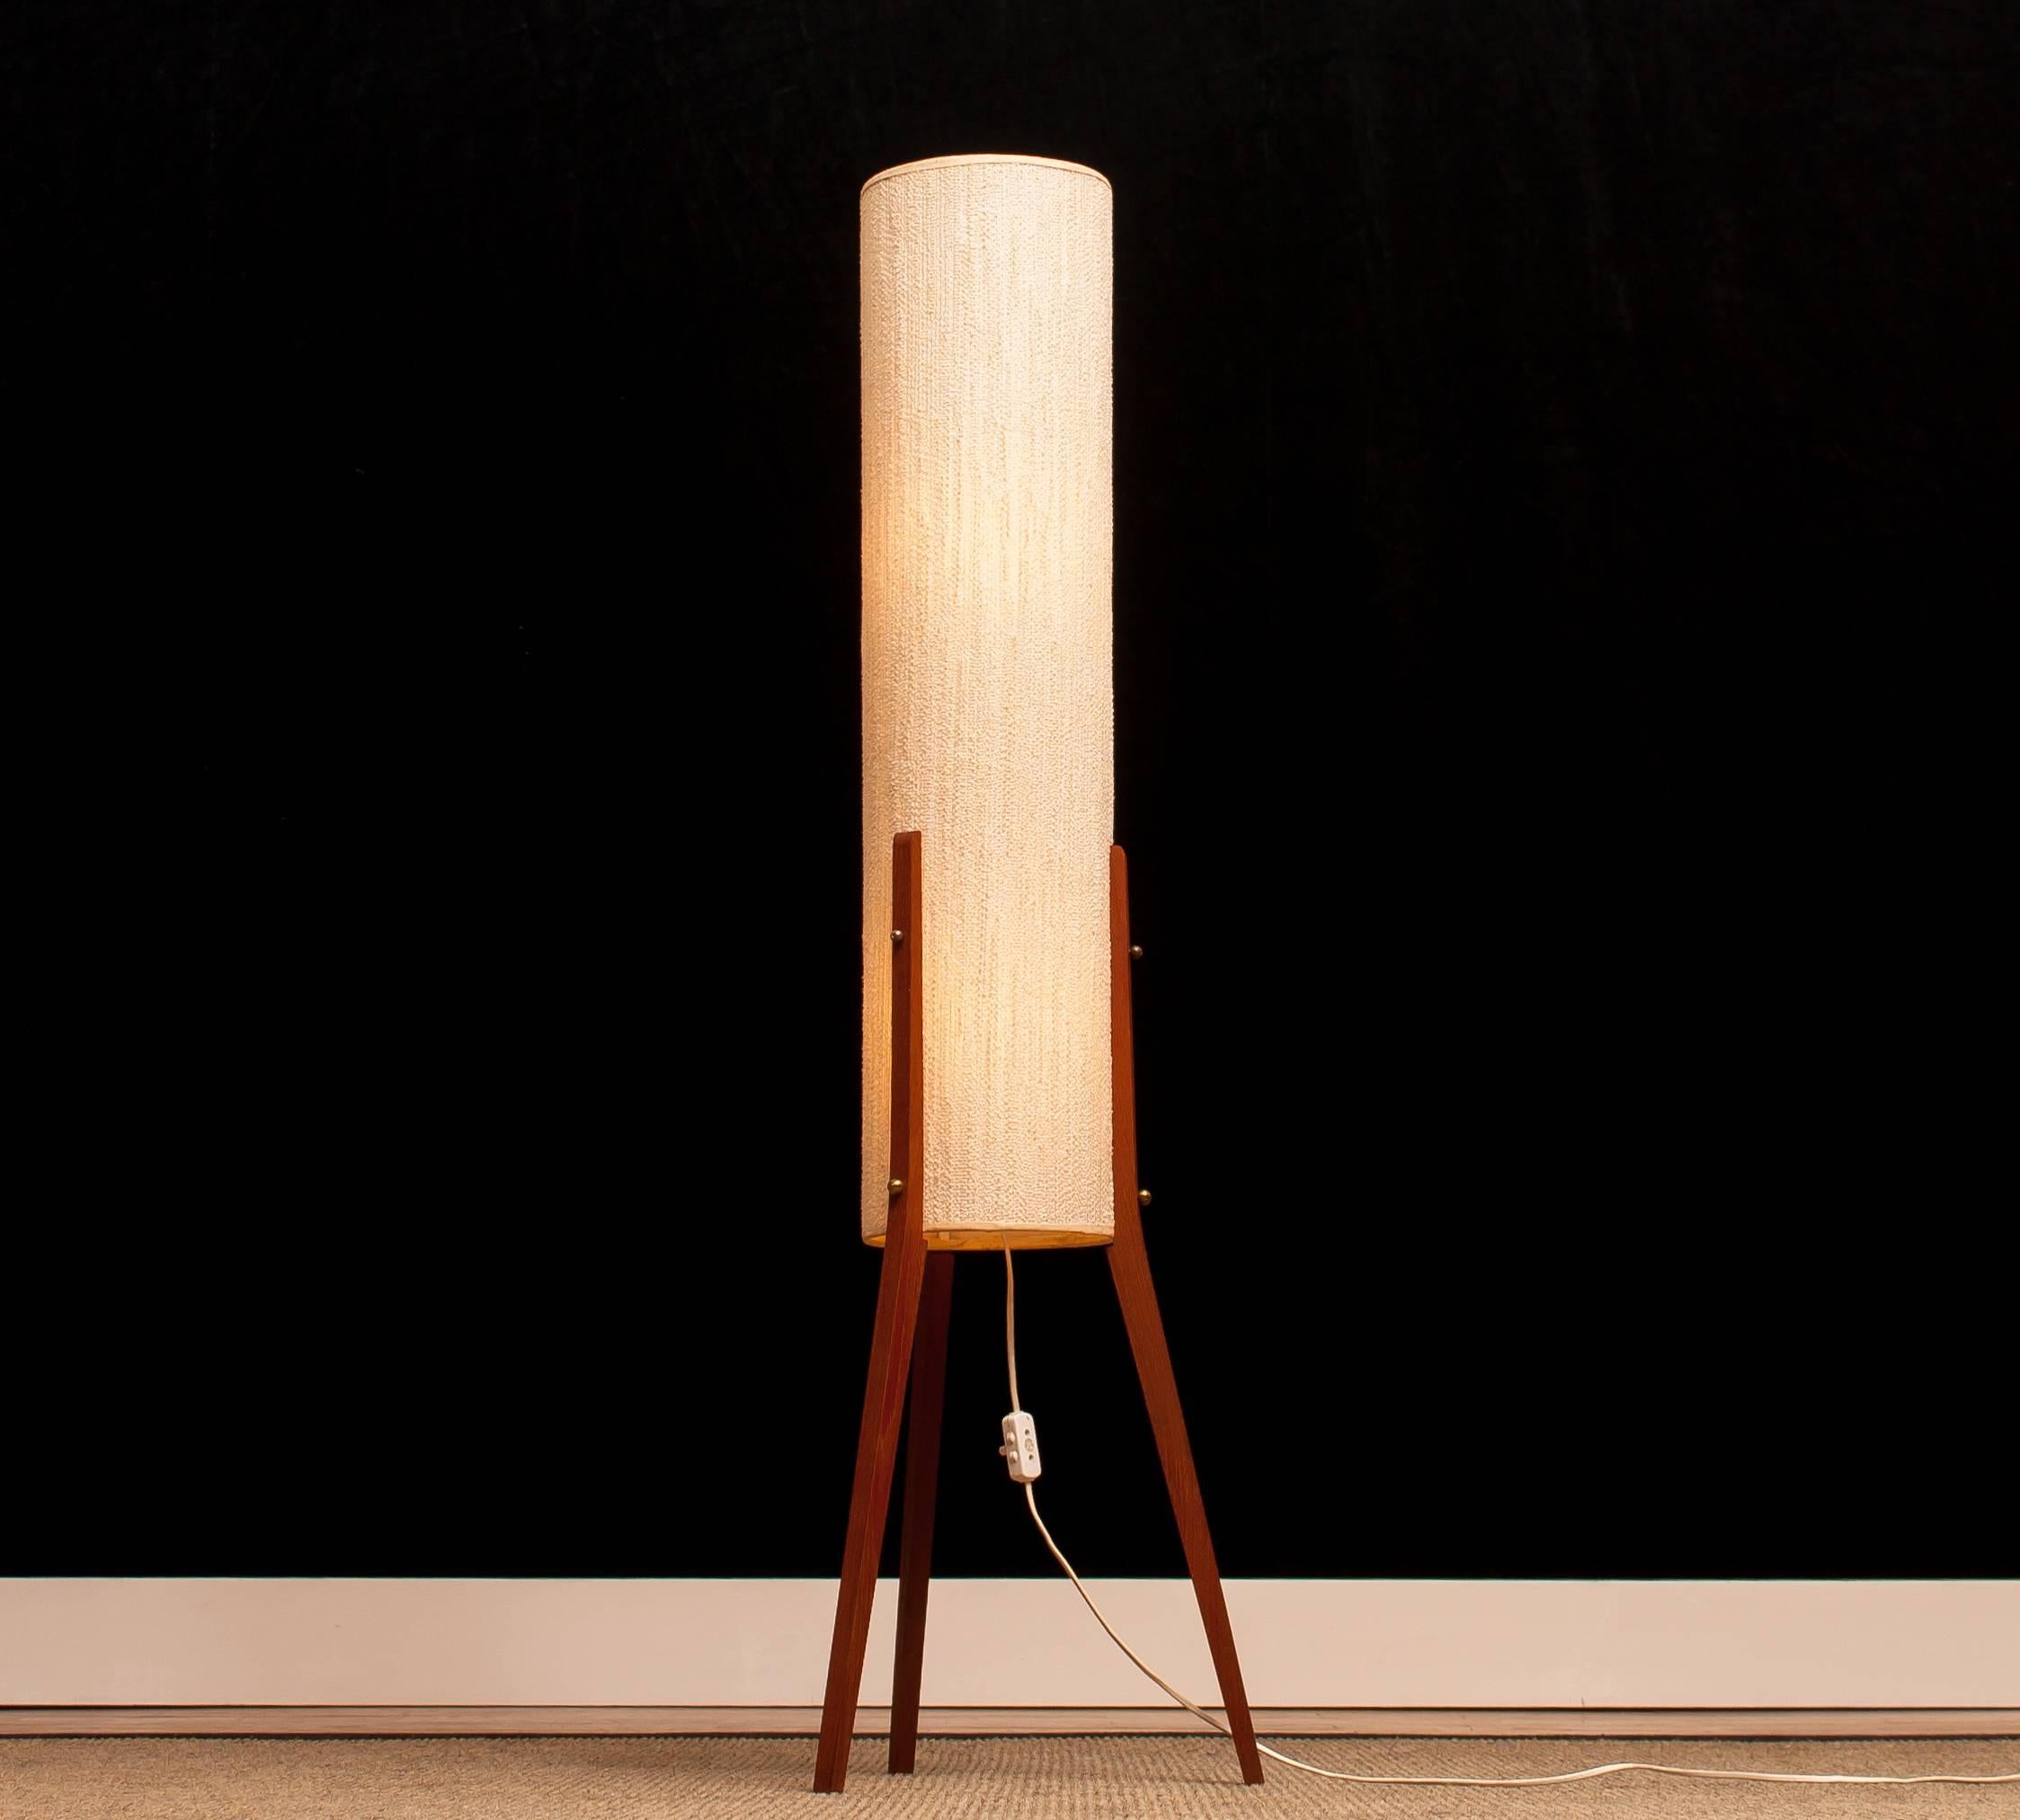 Wonderful large floor lamp made by Fog & Mørup, Denmark.
This lamp has a shade made of chenille on a teak Stand.
It is in a beautiful condition.
Period 1960s.
Dimensions: H 120 cm, ø 35 cm.